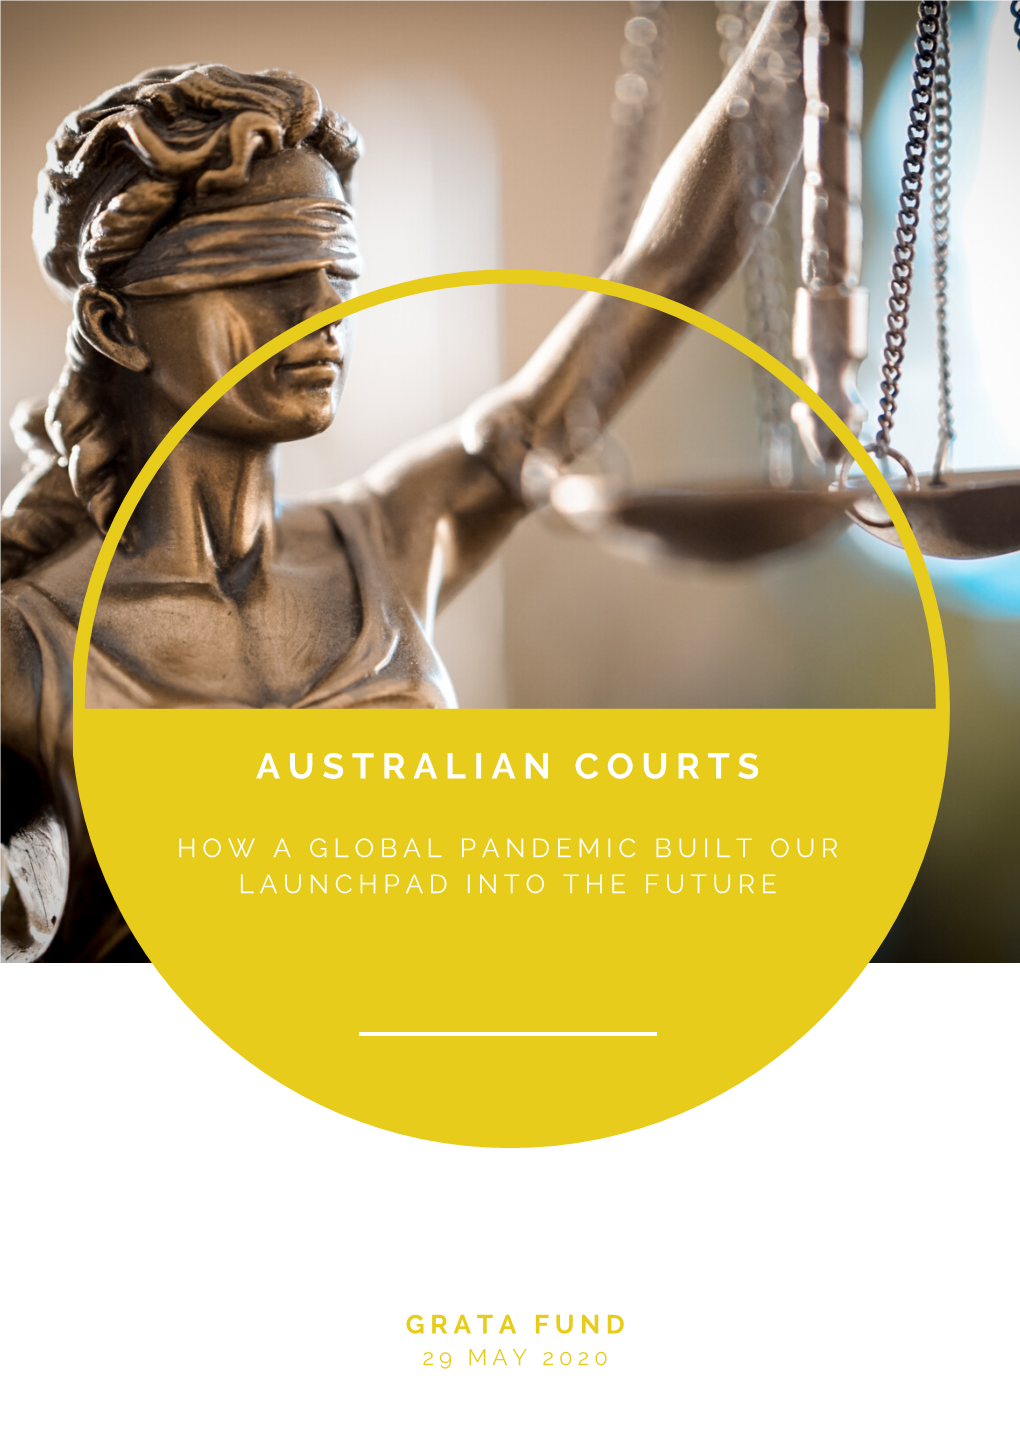 Australian Courts Have Traditionally Been Slower to Embrace Technology and Engage in Online Dispute Resolution